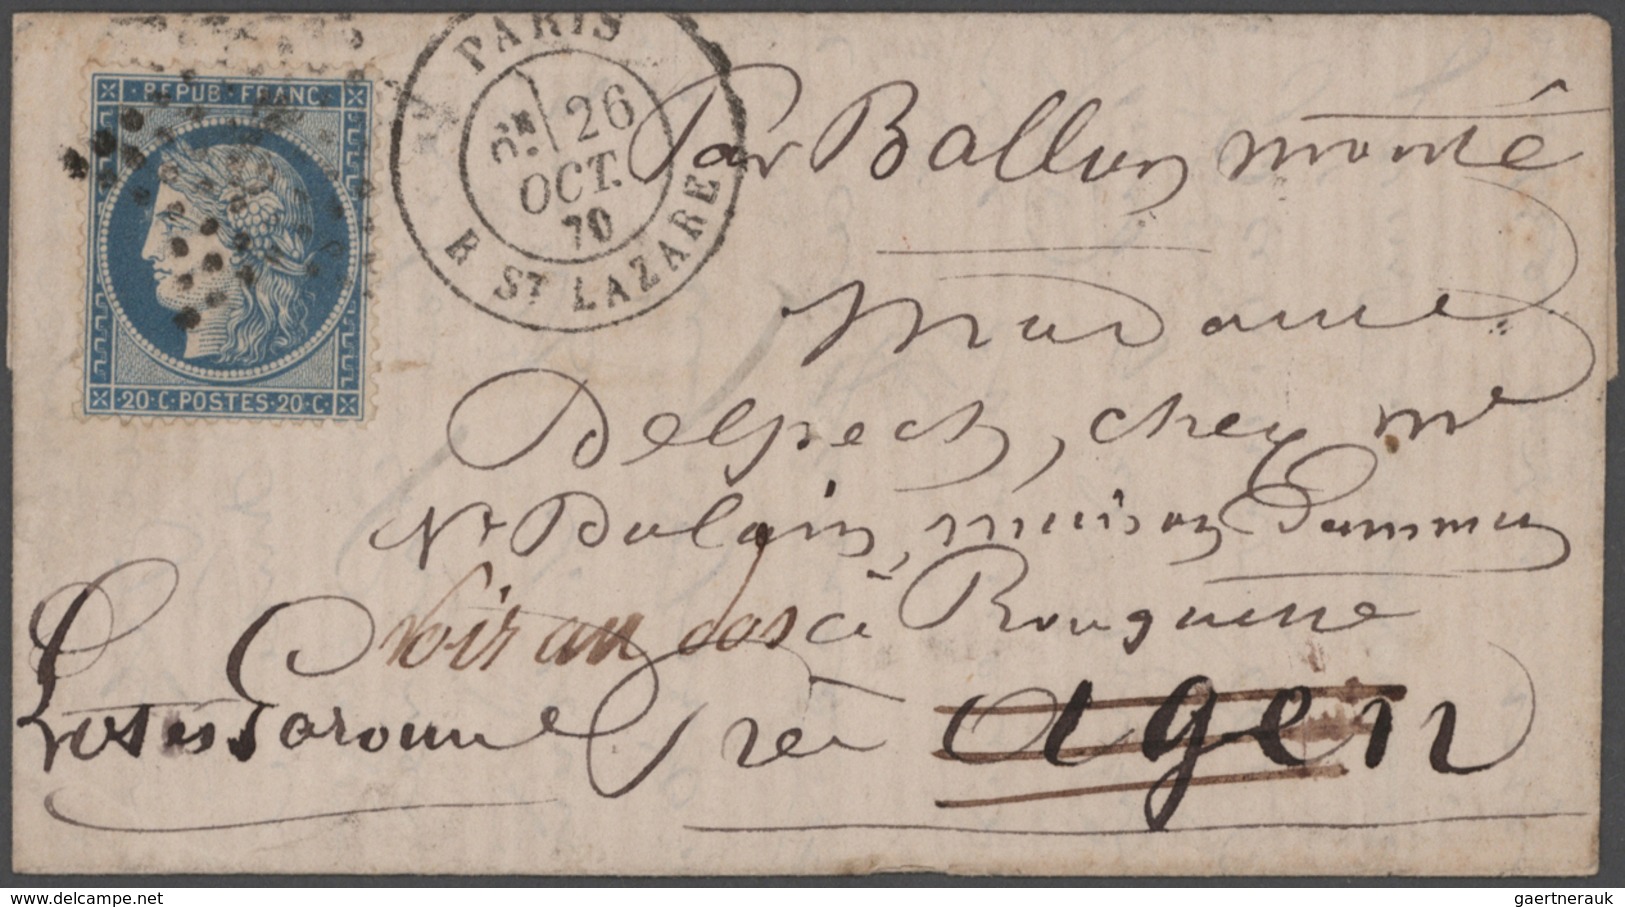 Frankreich - Ballonpost: 1870/1871, Franco-Prussian War in general and Ballon monte in particular, s